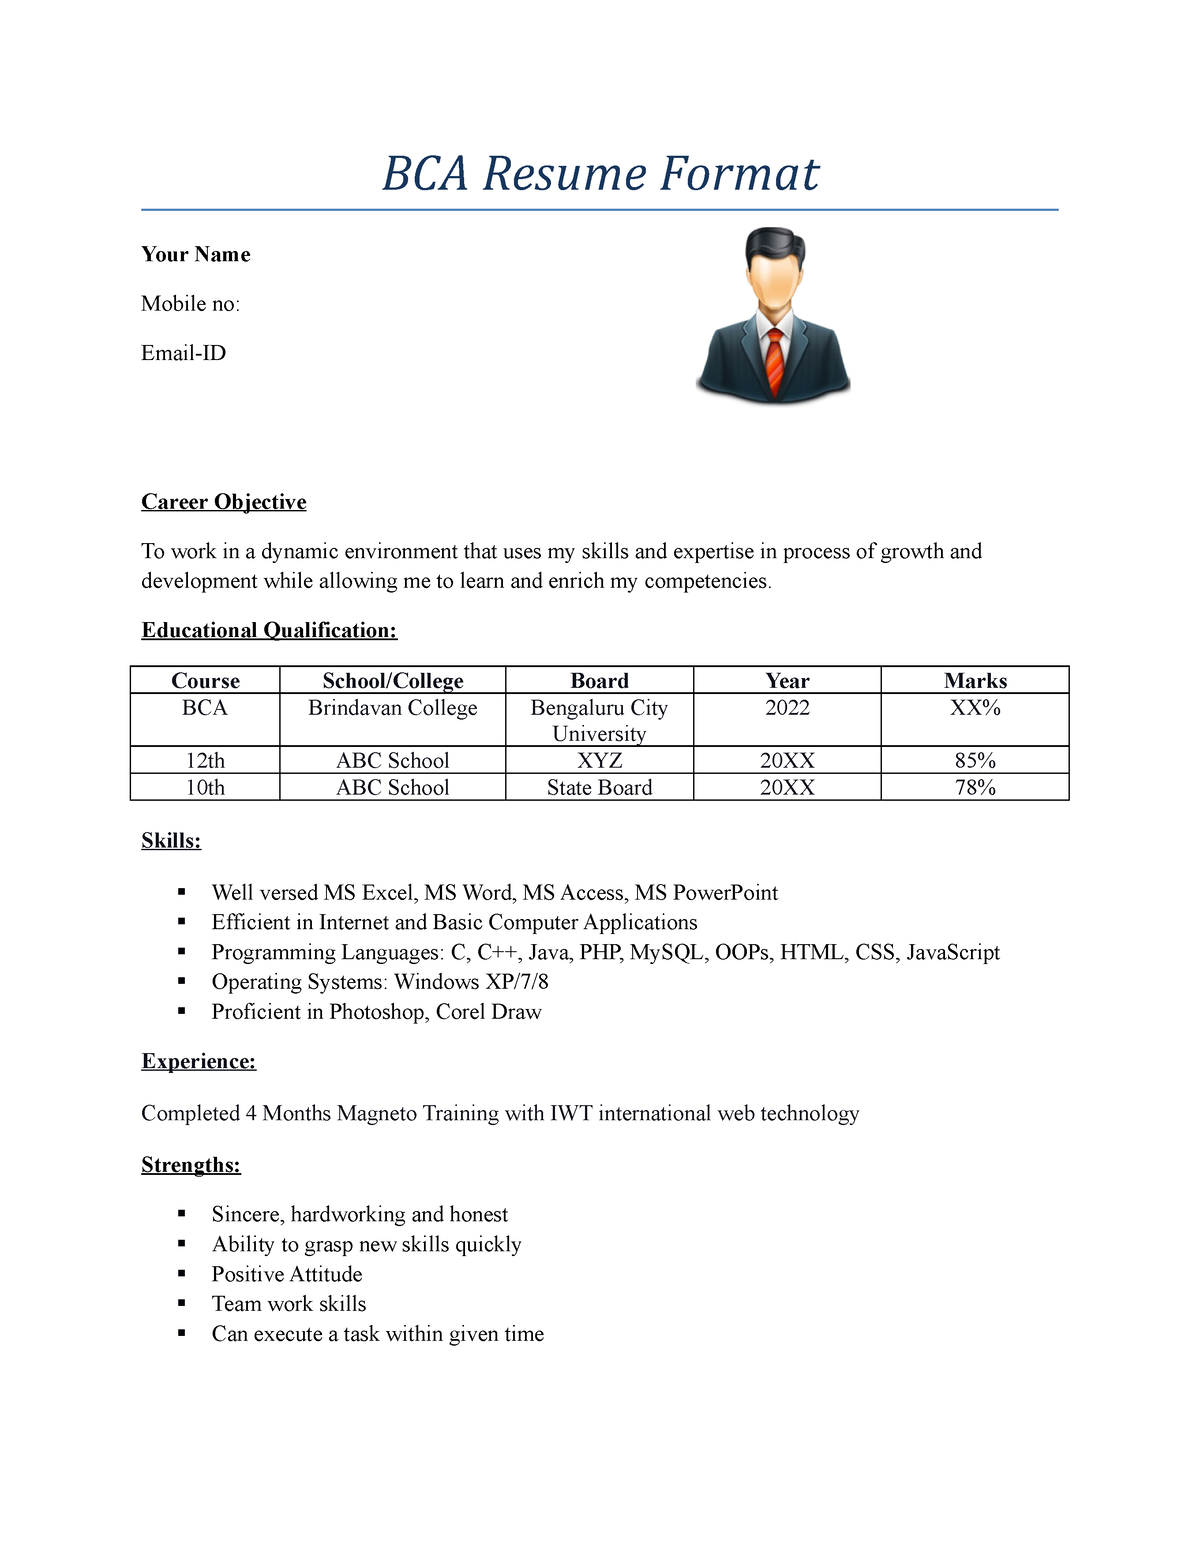 resume format for bca students